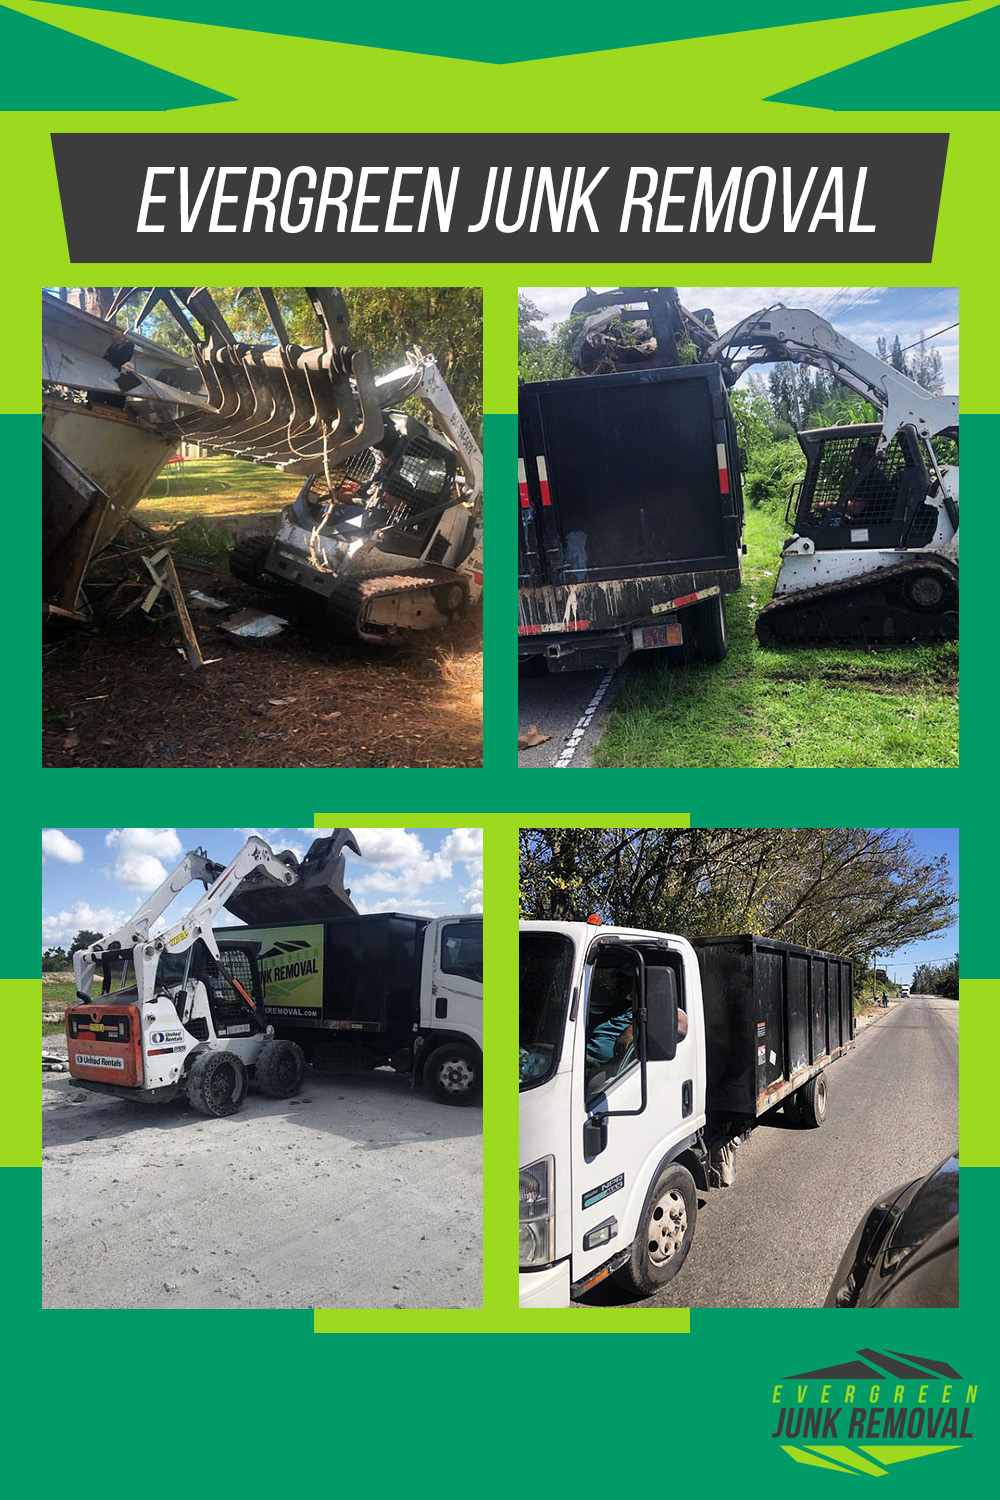 Grosse Ile Township Junk Removal Service